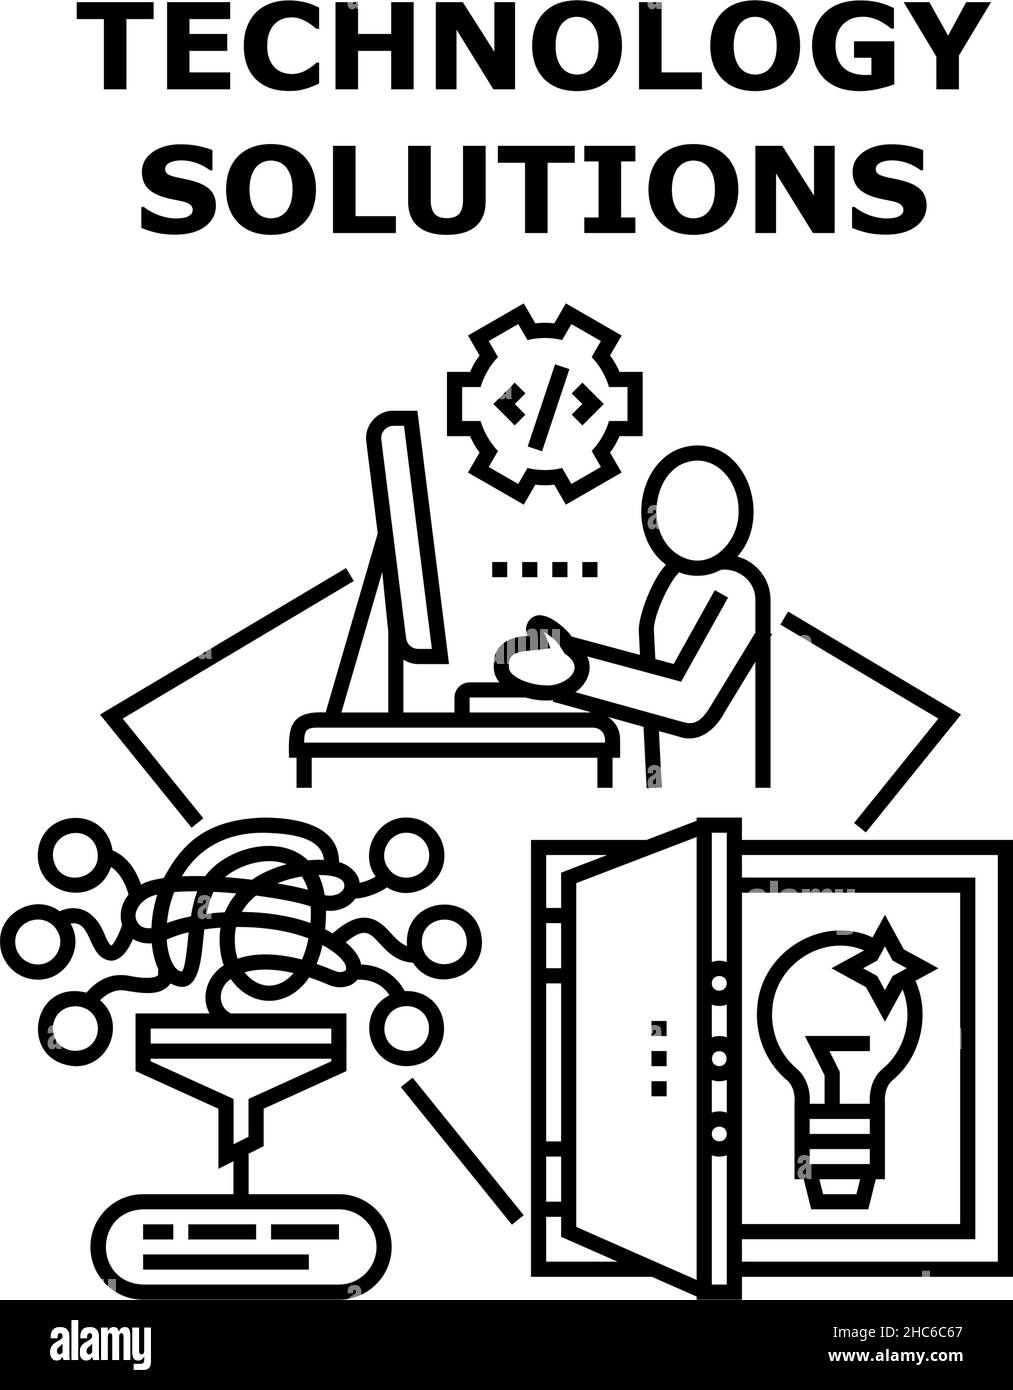 Technology solutions icon vector illustration Stock Vector